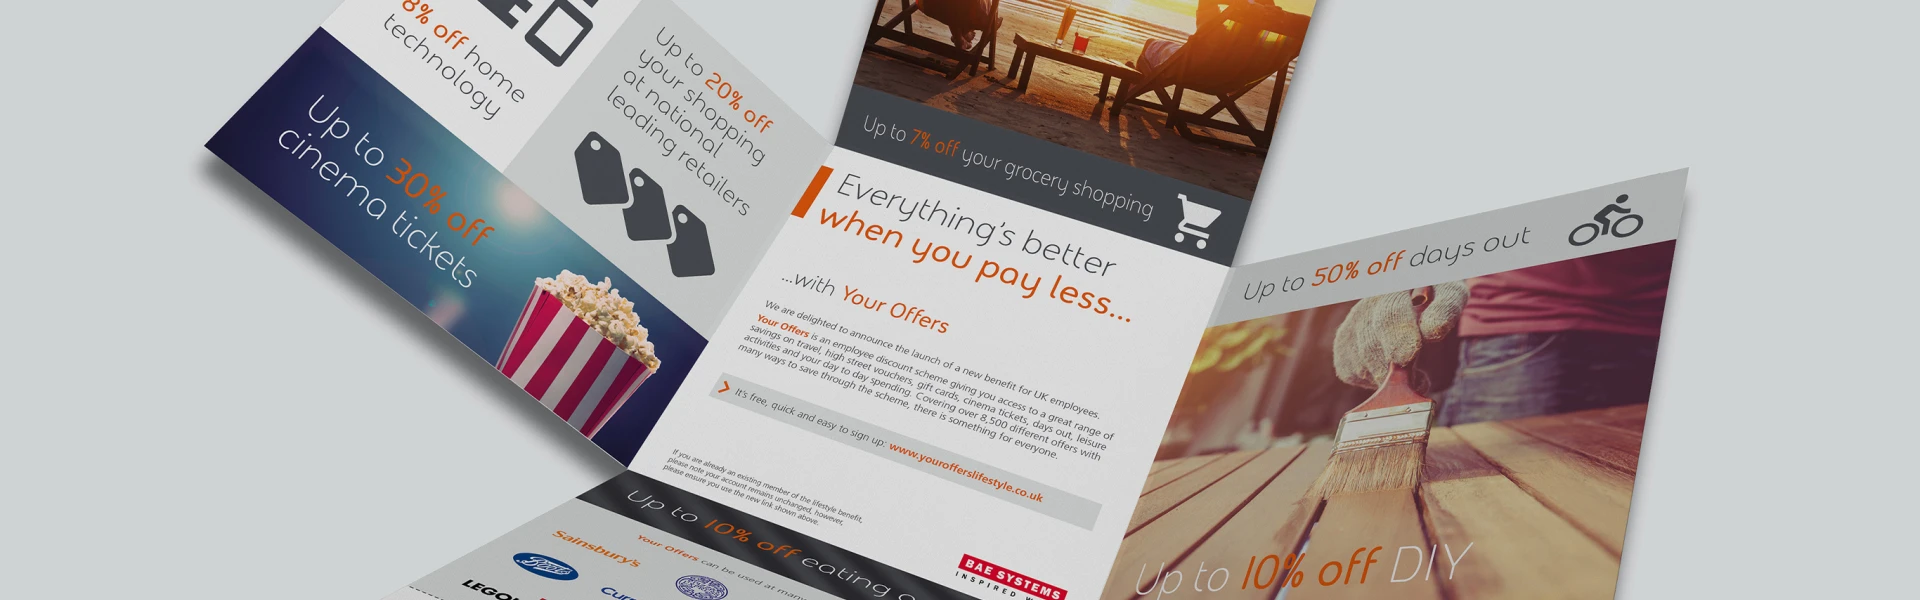 BAE Systems Employee Benefits Maltese Cross Campaign